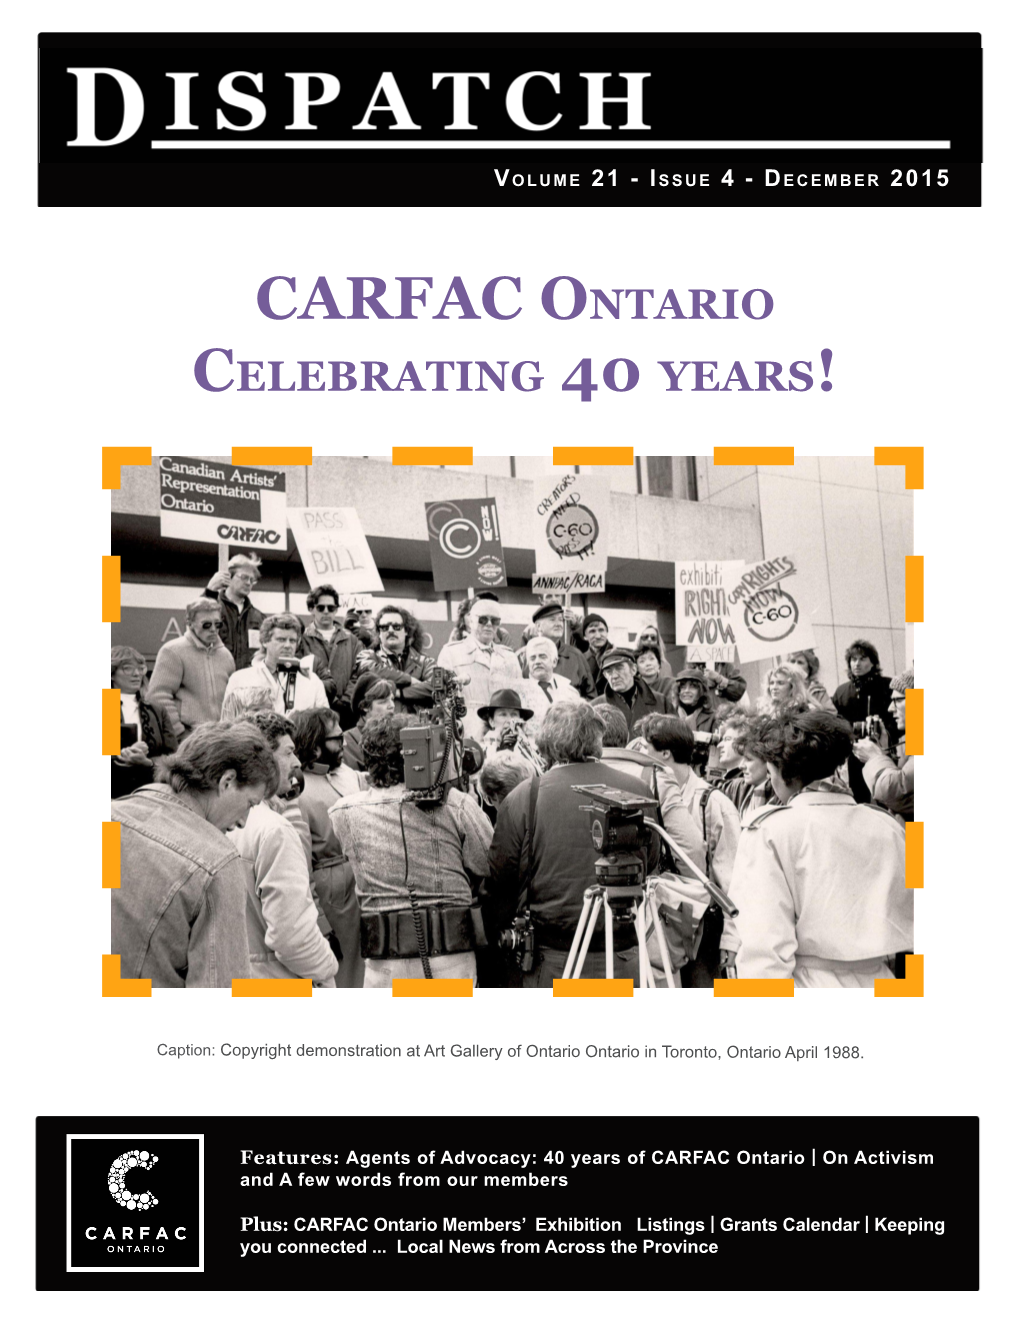 Dispatch Organization Showed No Less Fiery a Conception of CARFAC Ontario’S Fortieth Anniversary